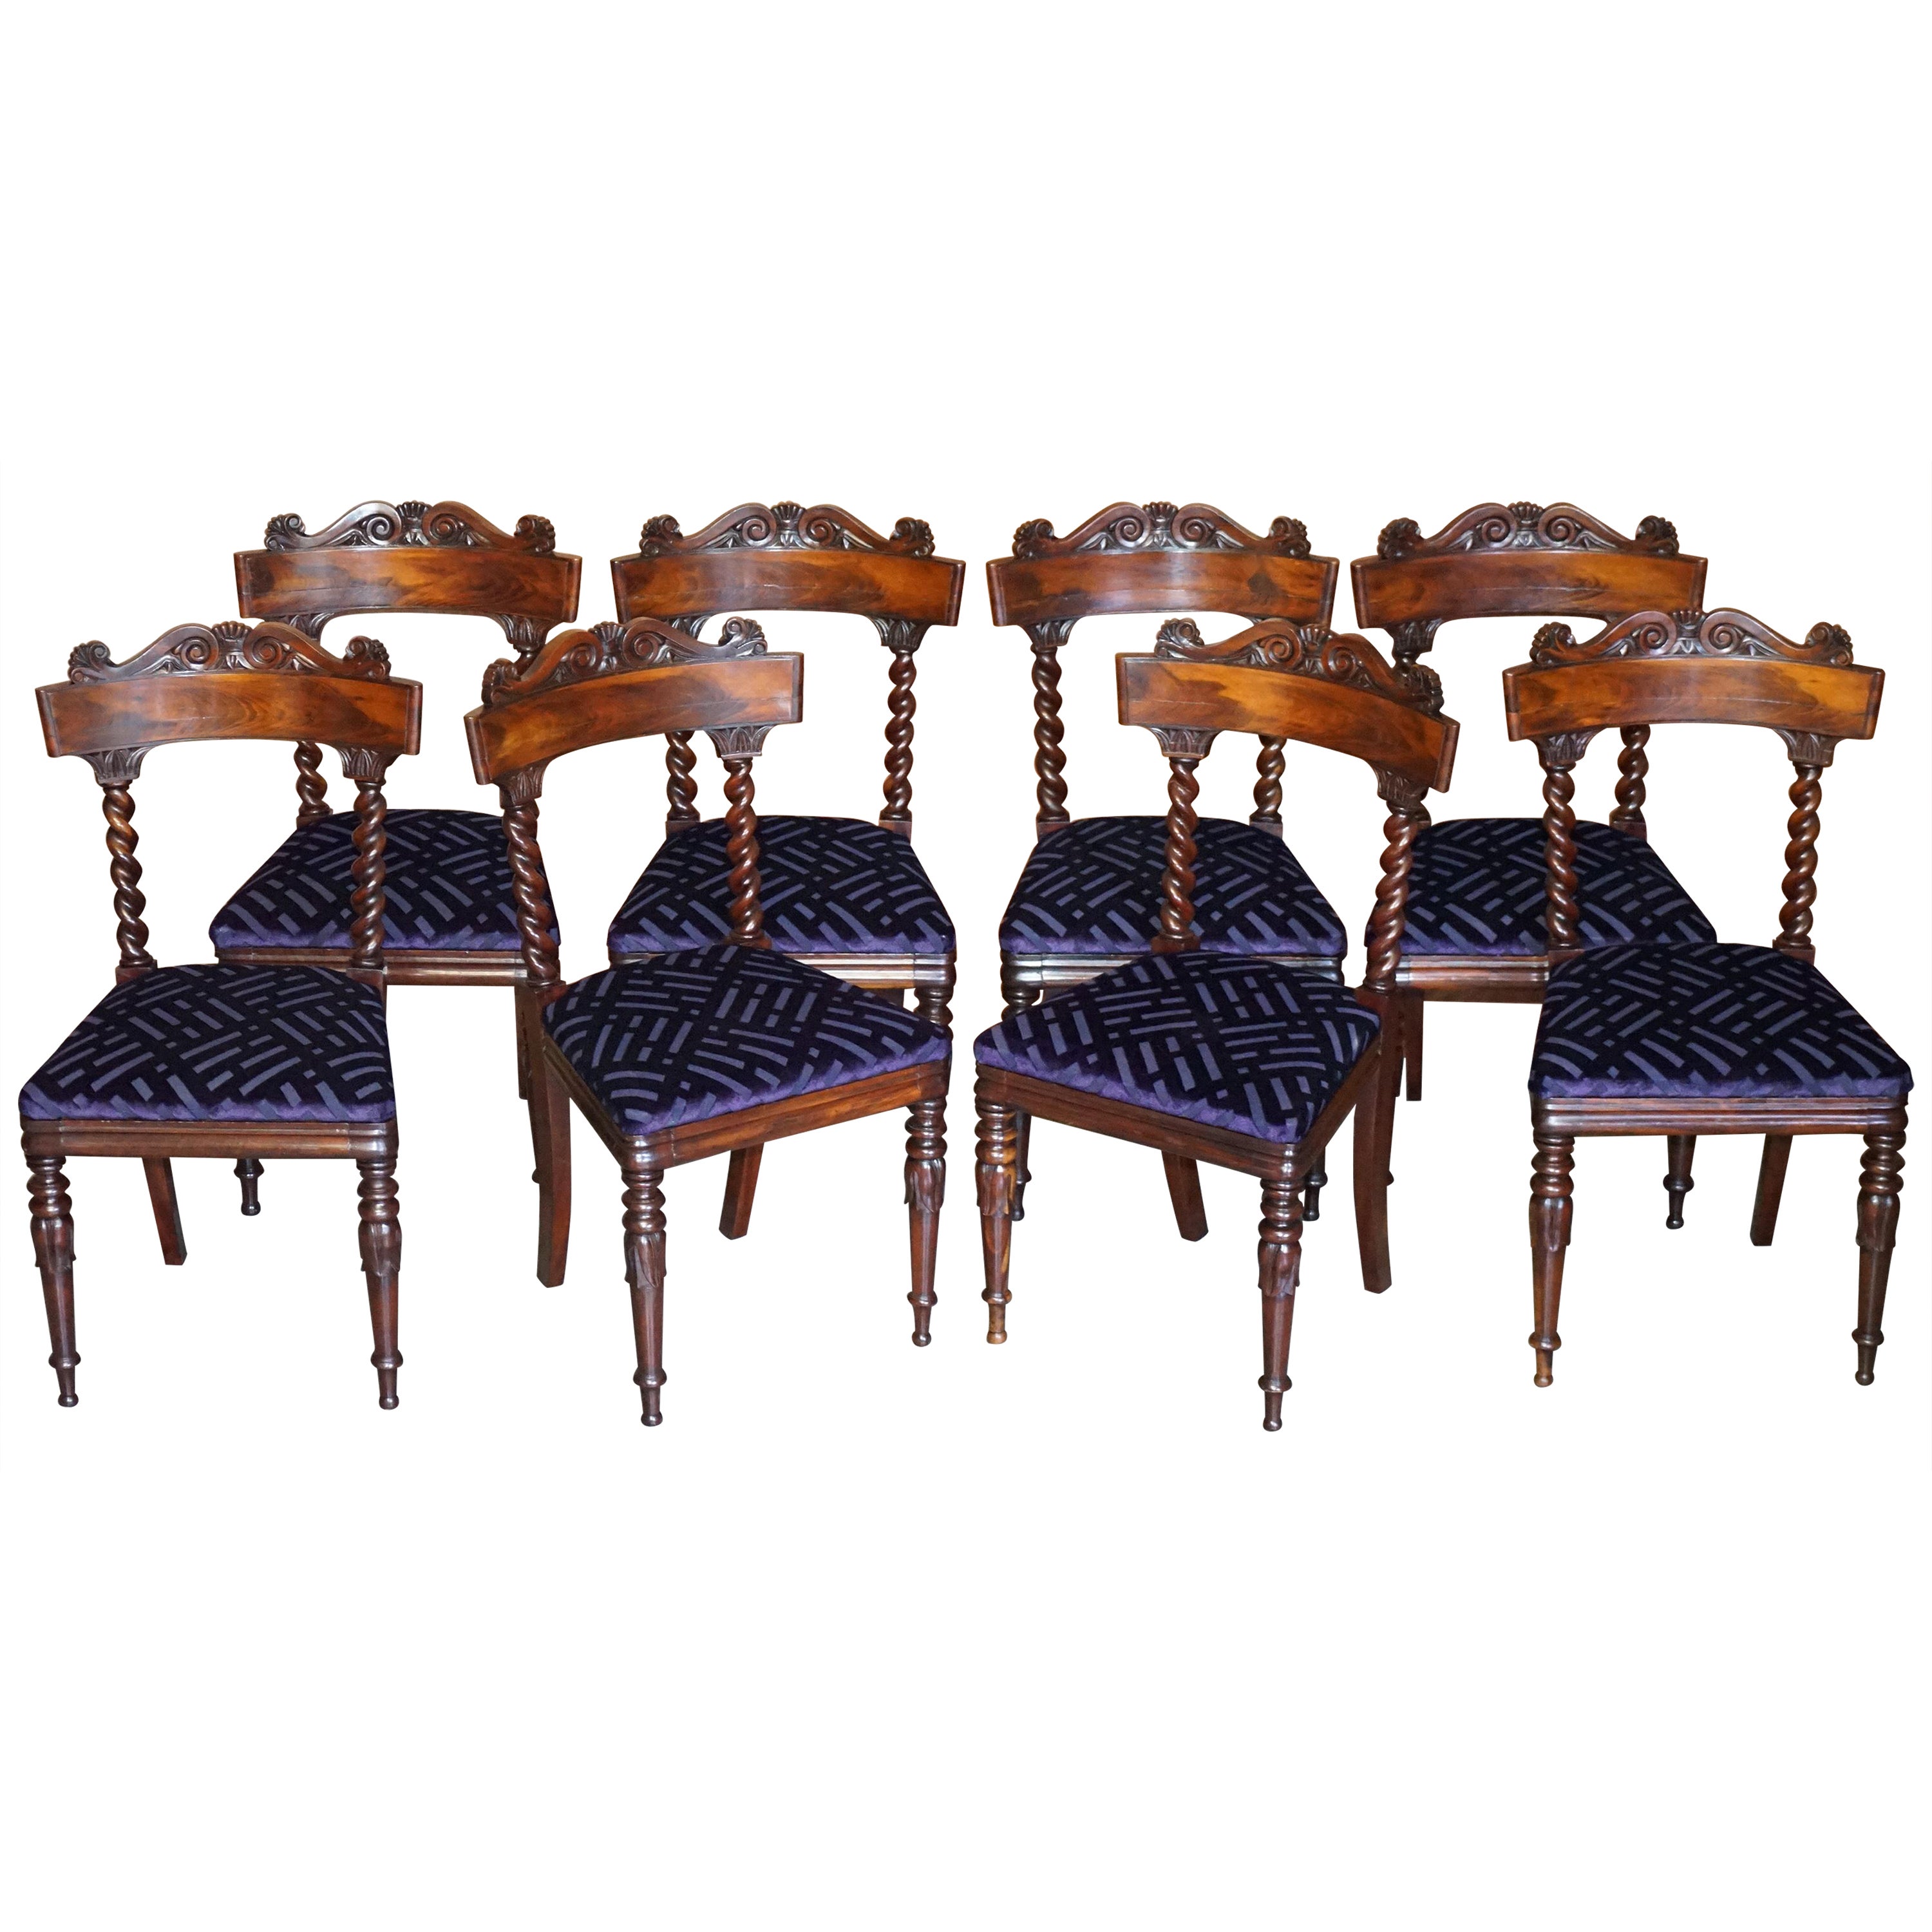 Eight Stunning Antique Victorian Hardwood Dining Chairs with Barley Twist Backs